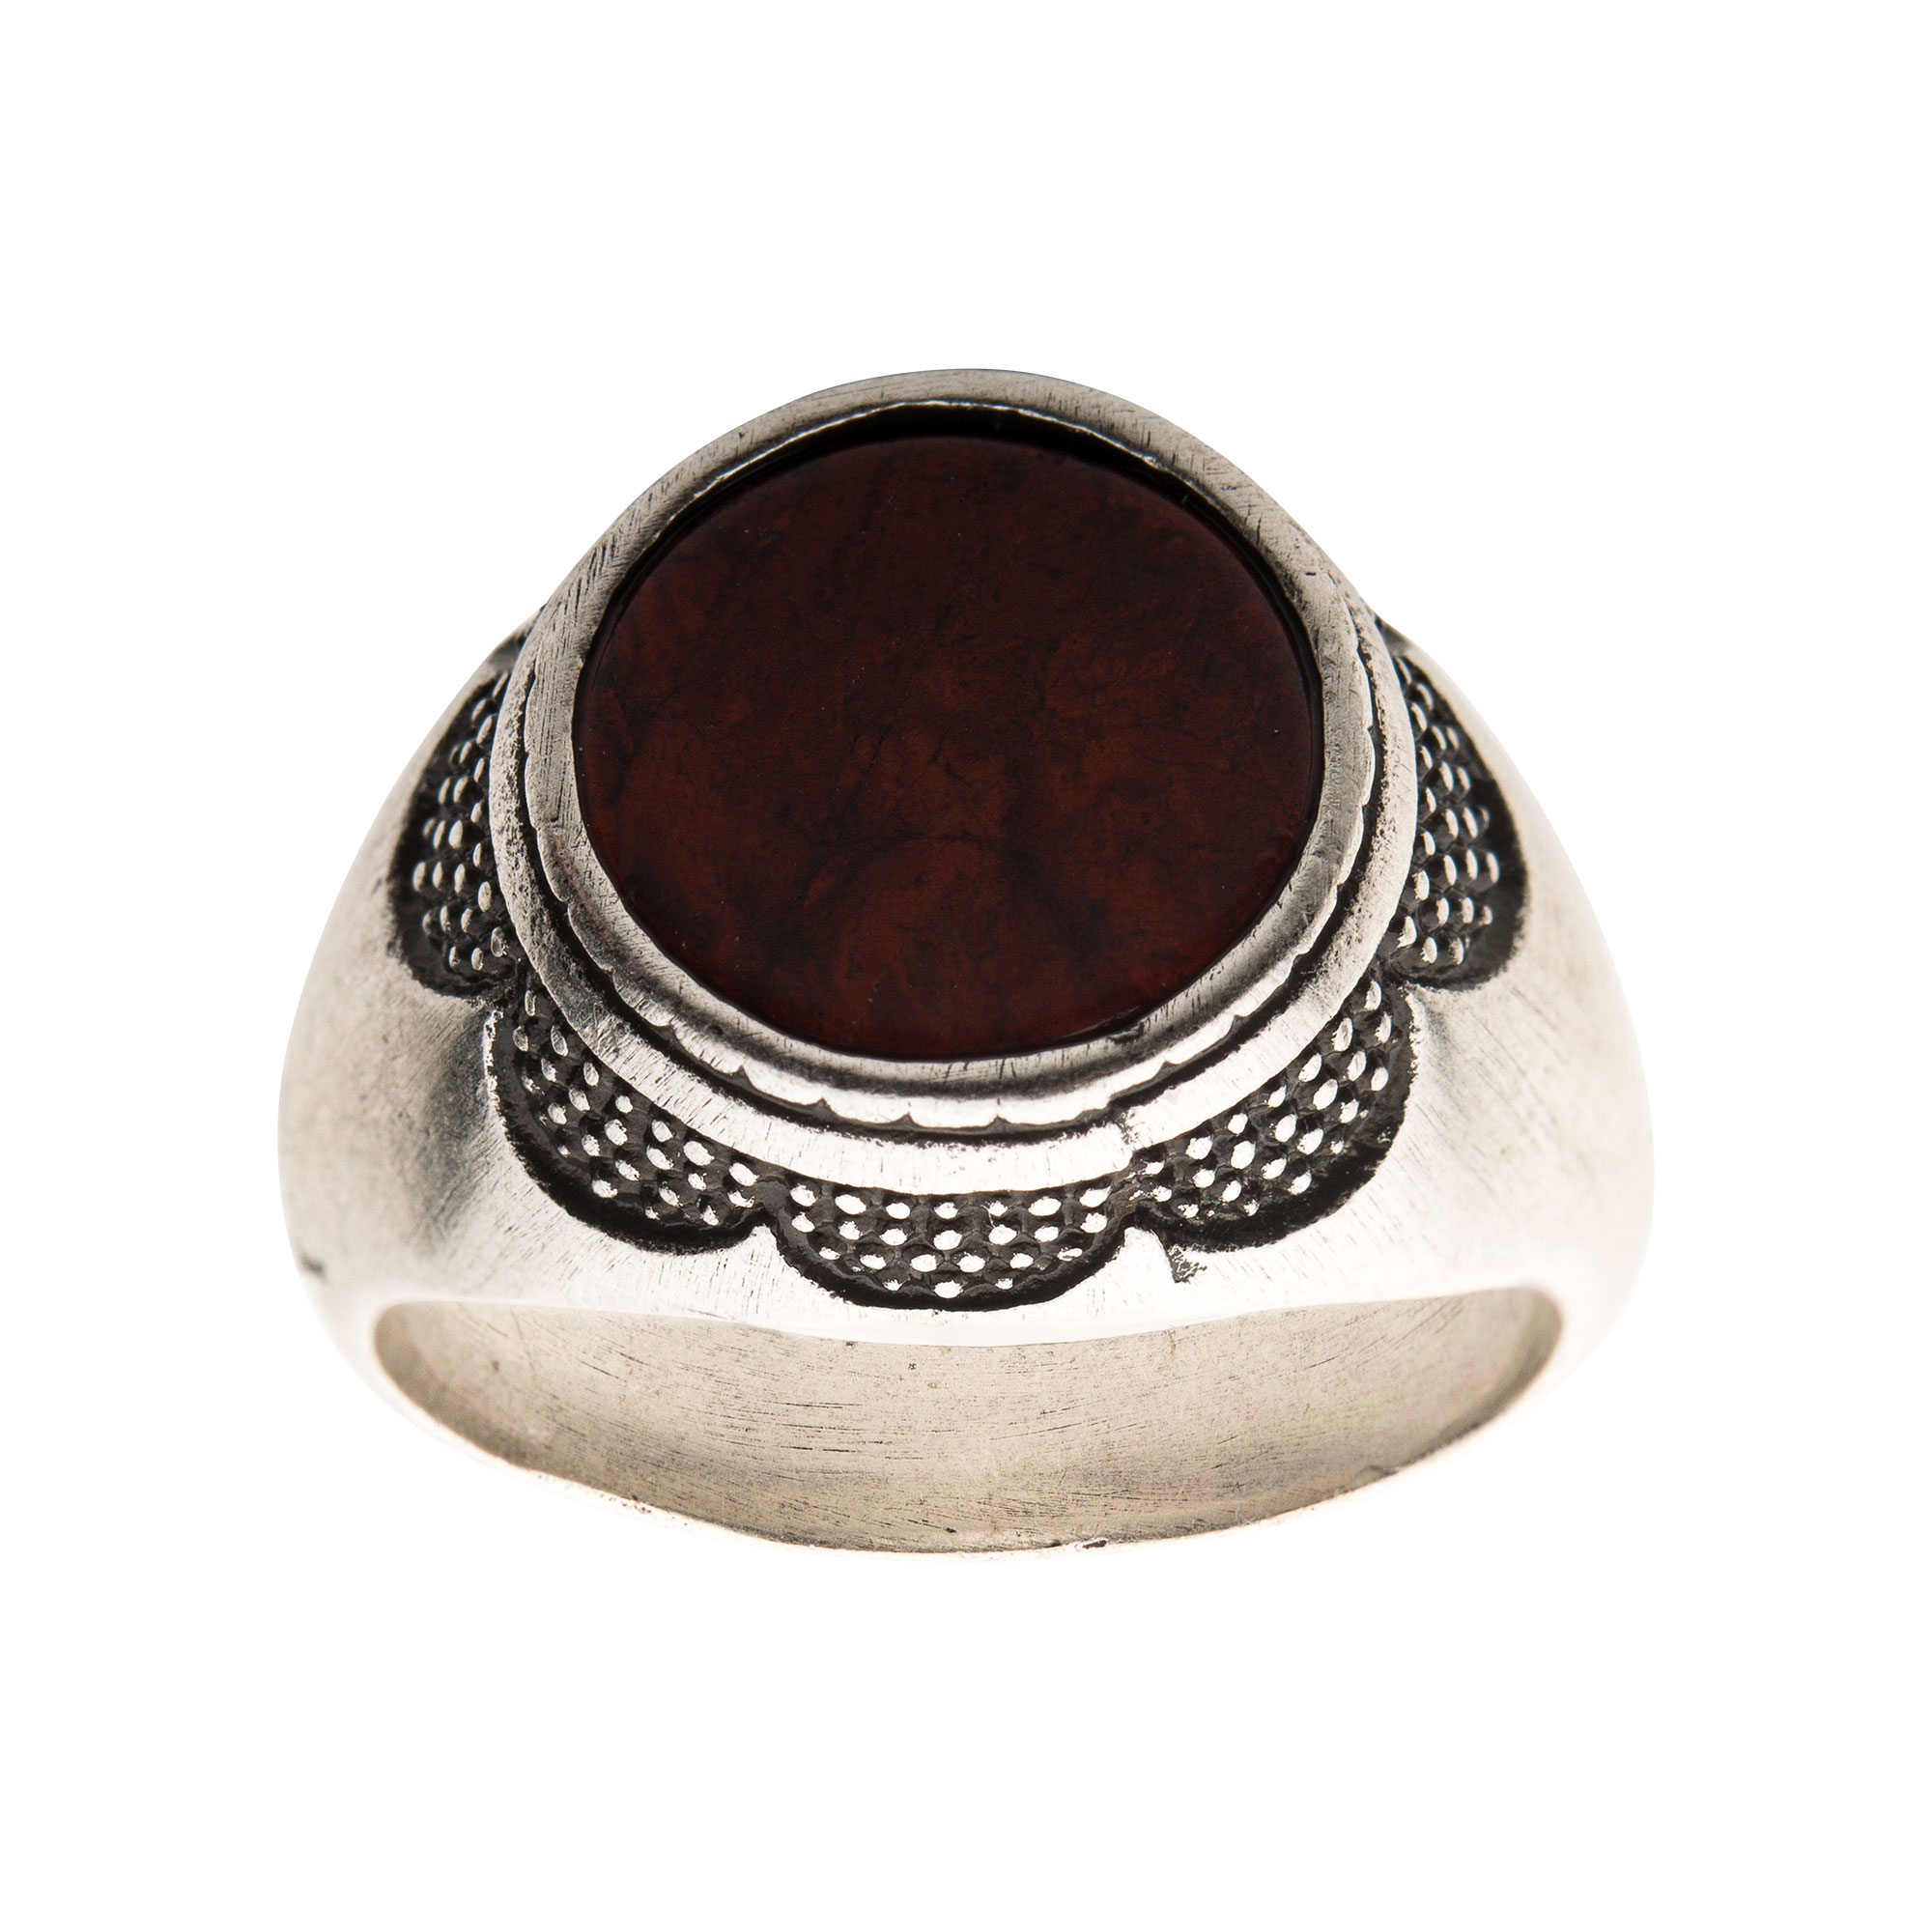 Stainless Steel Silver Plated with Red Jasper Stone Ring Image 2 Enchanted Jewelry Plainfield, CT